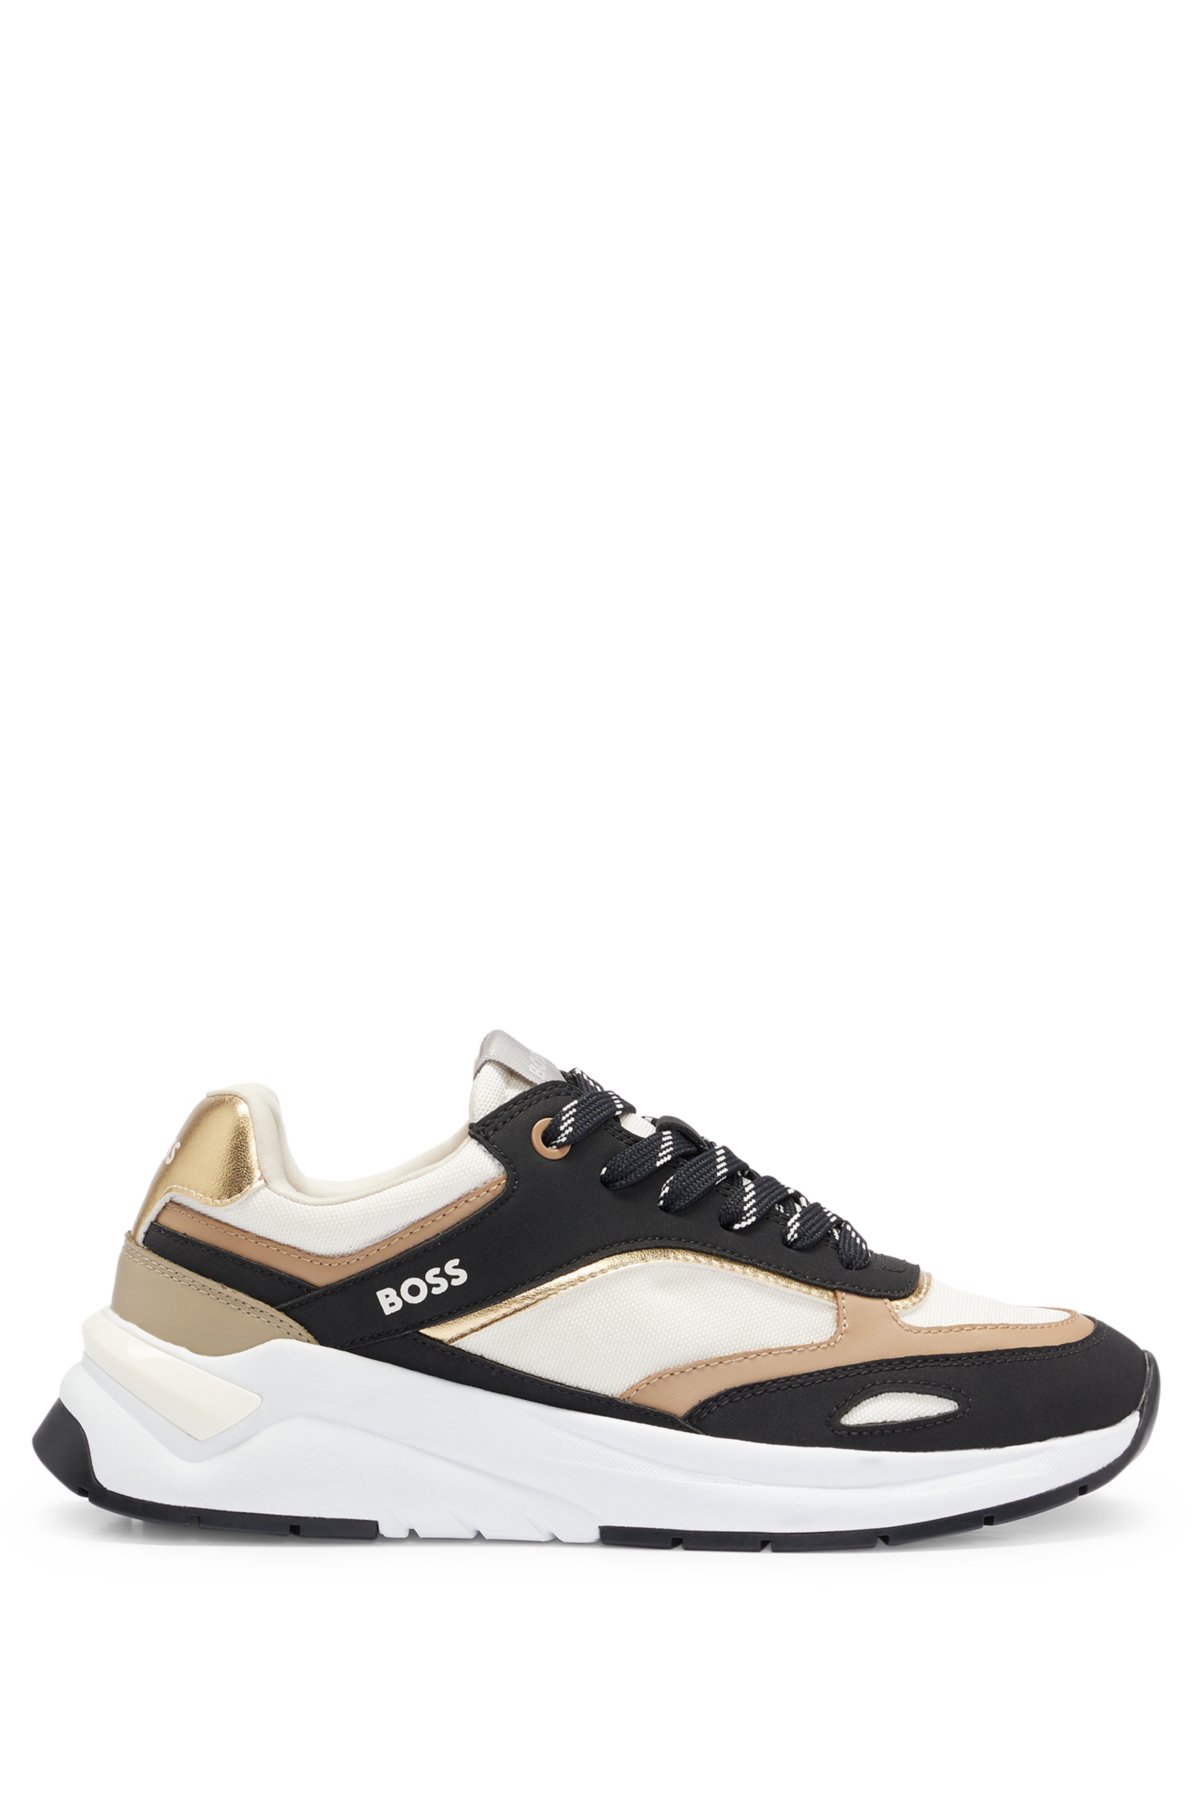 BOSS - Mixed-material trainers with metallic details